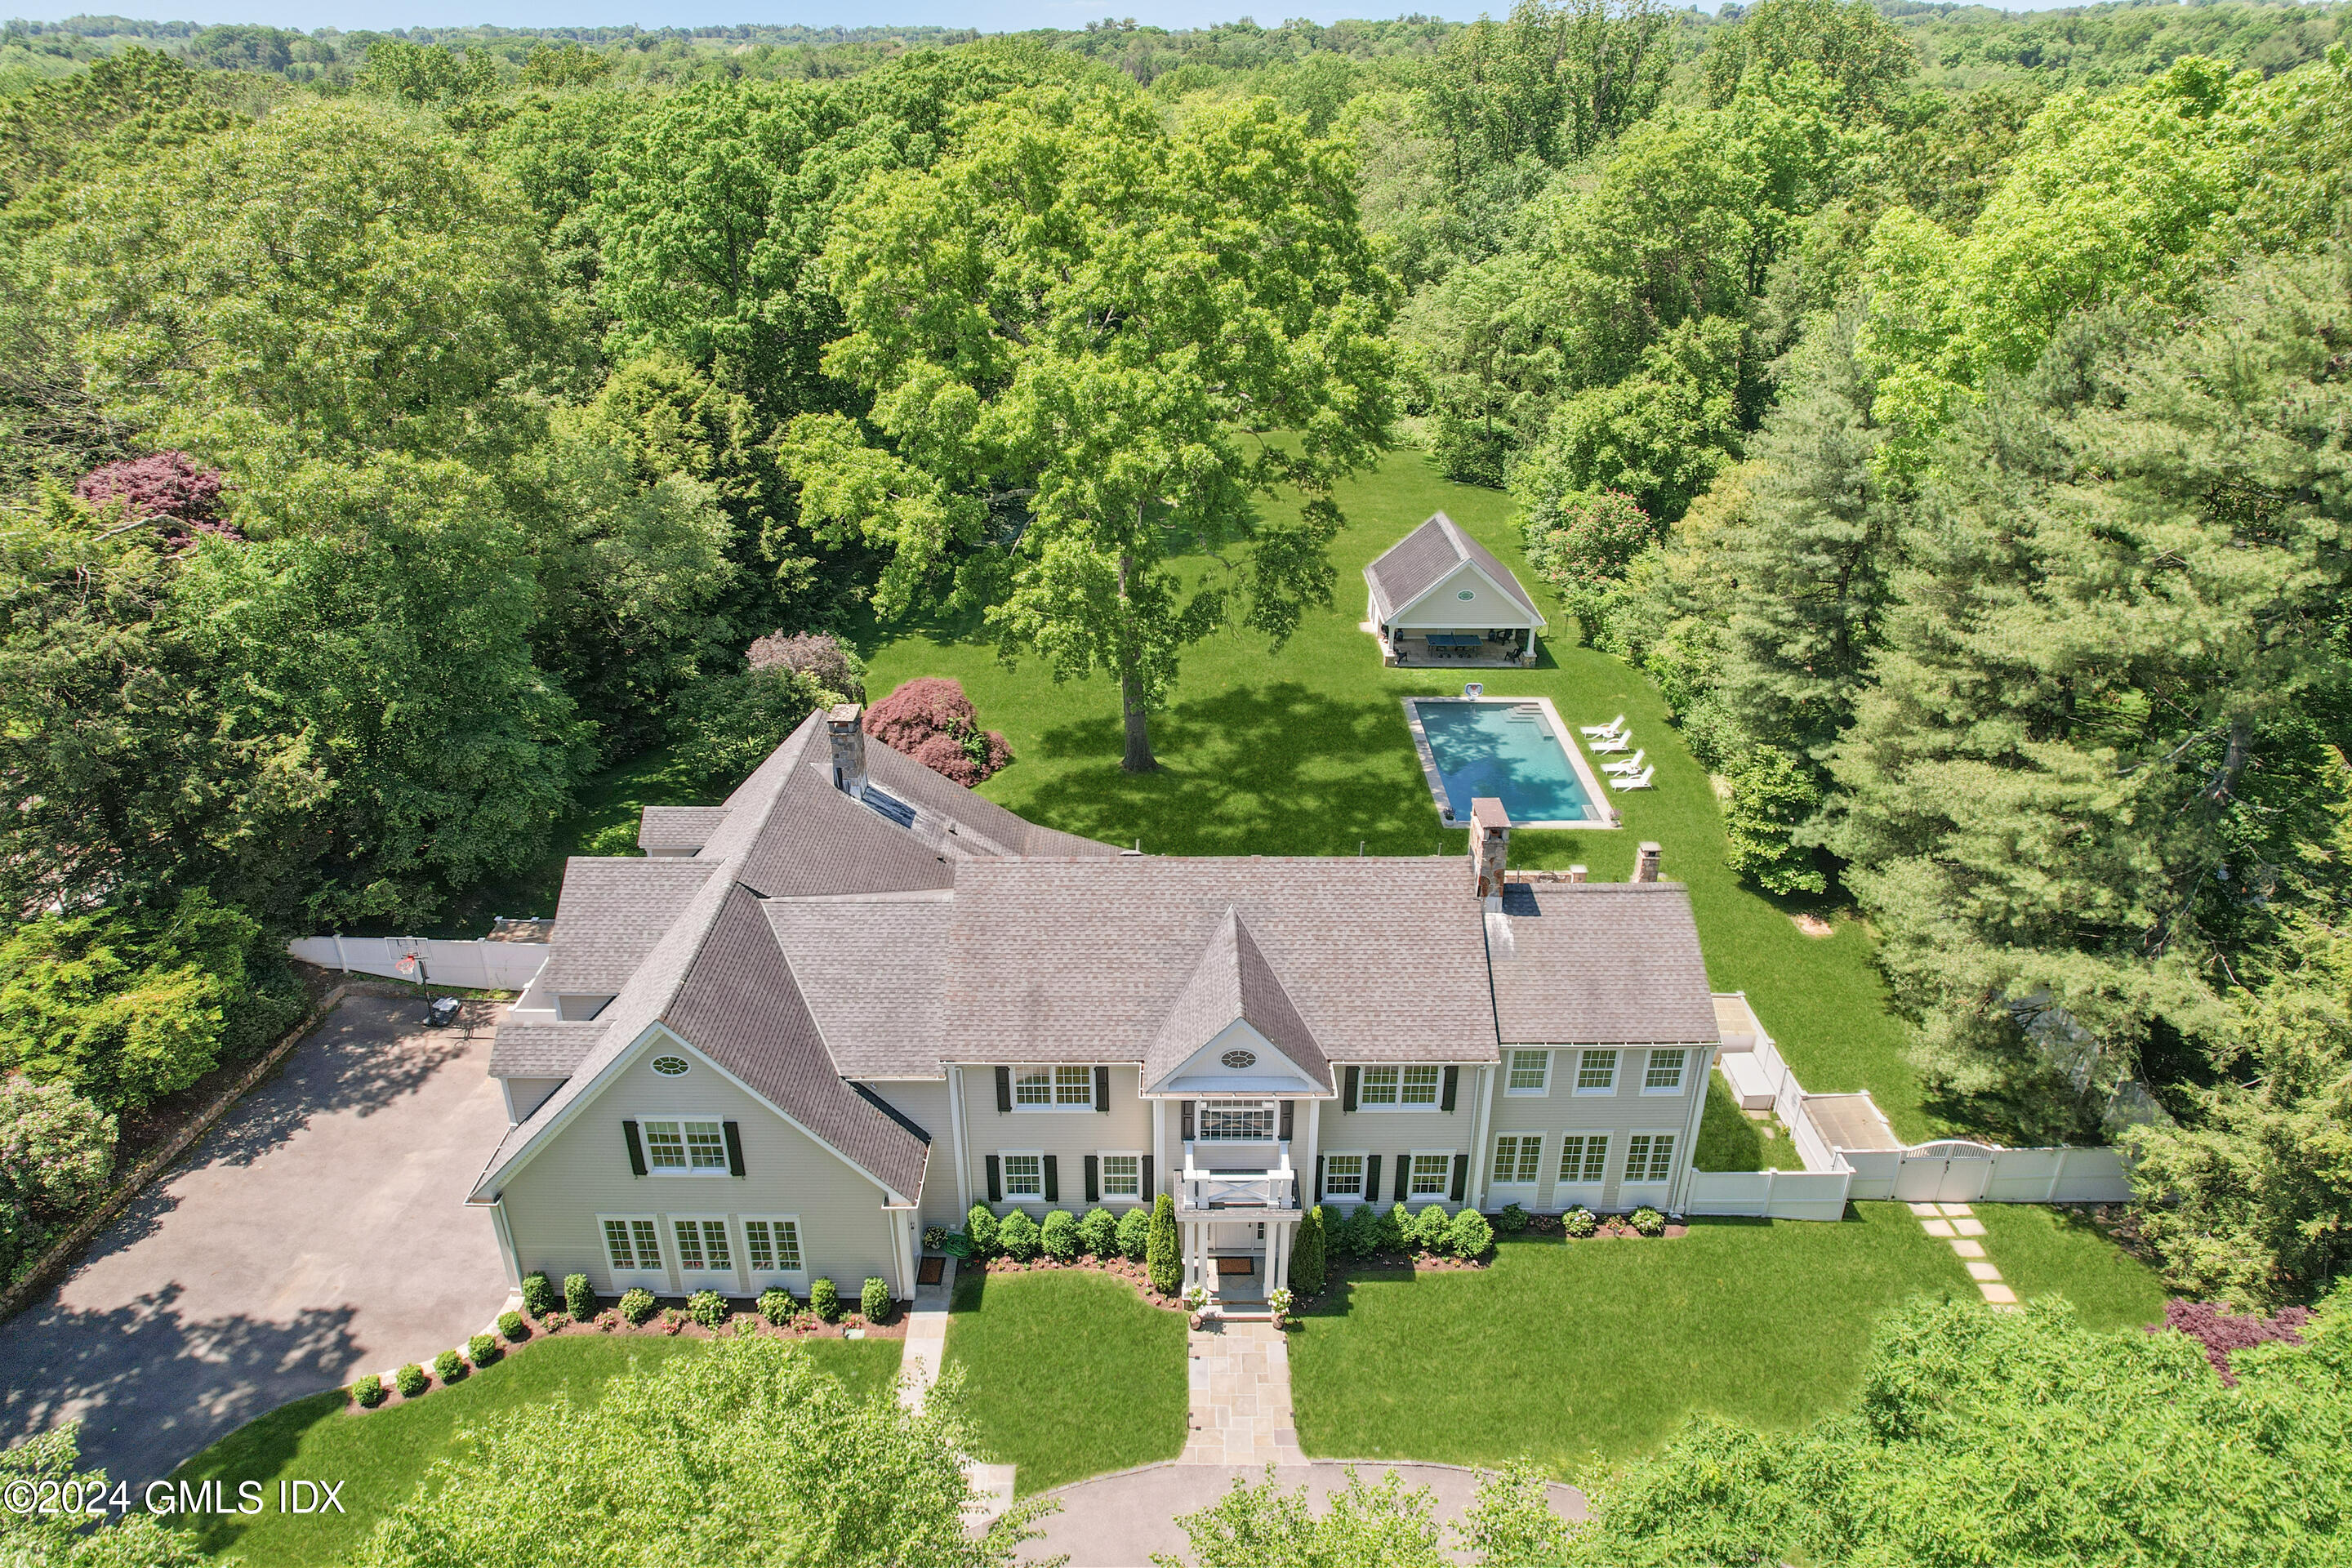 17 Will Merry Lane, Greenwich, Connecticut - 6 Bedrooms  
7 Bathrooms - 